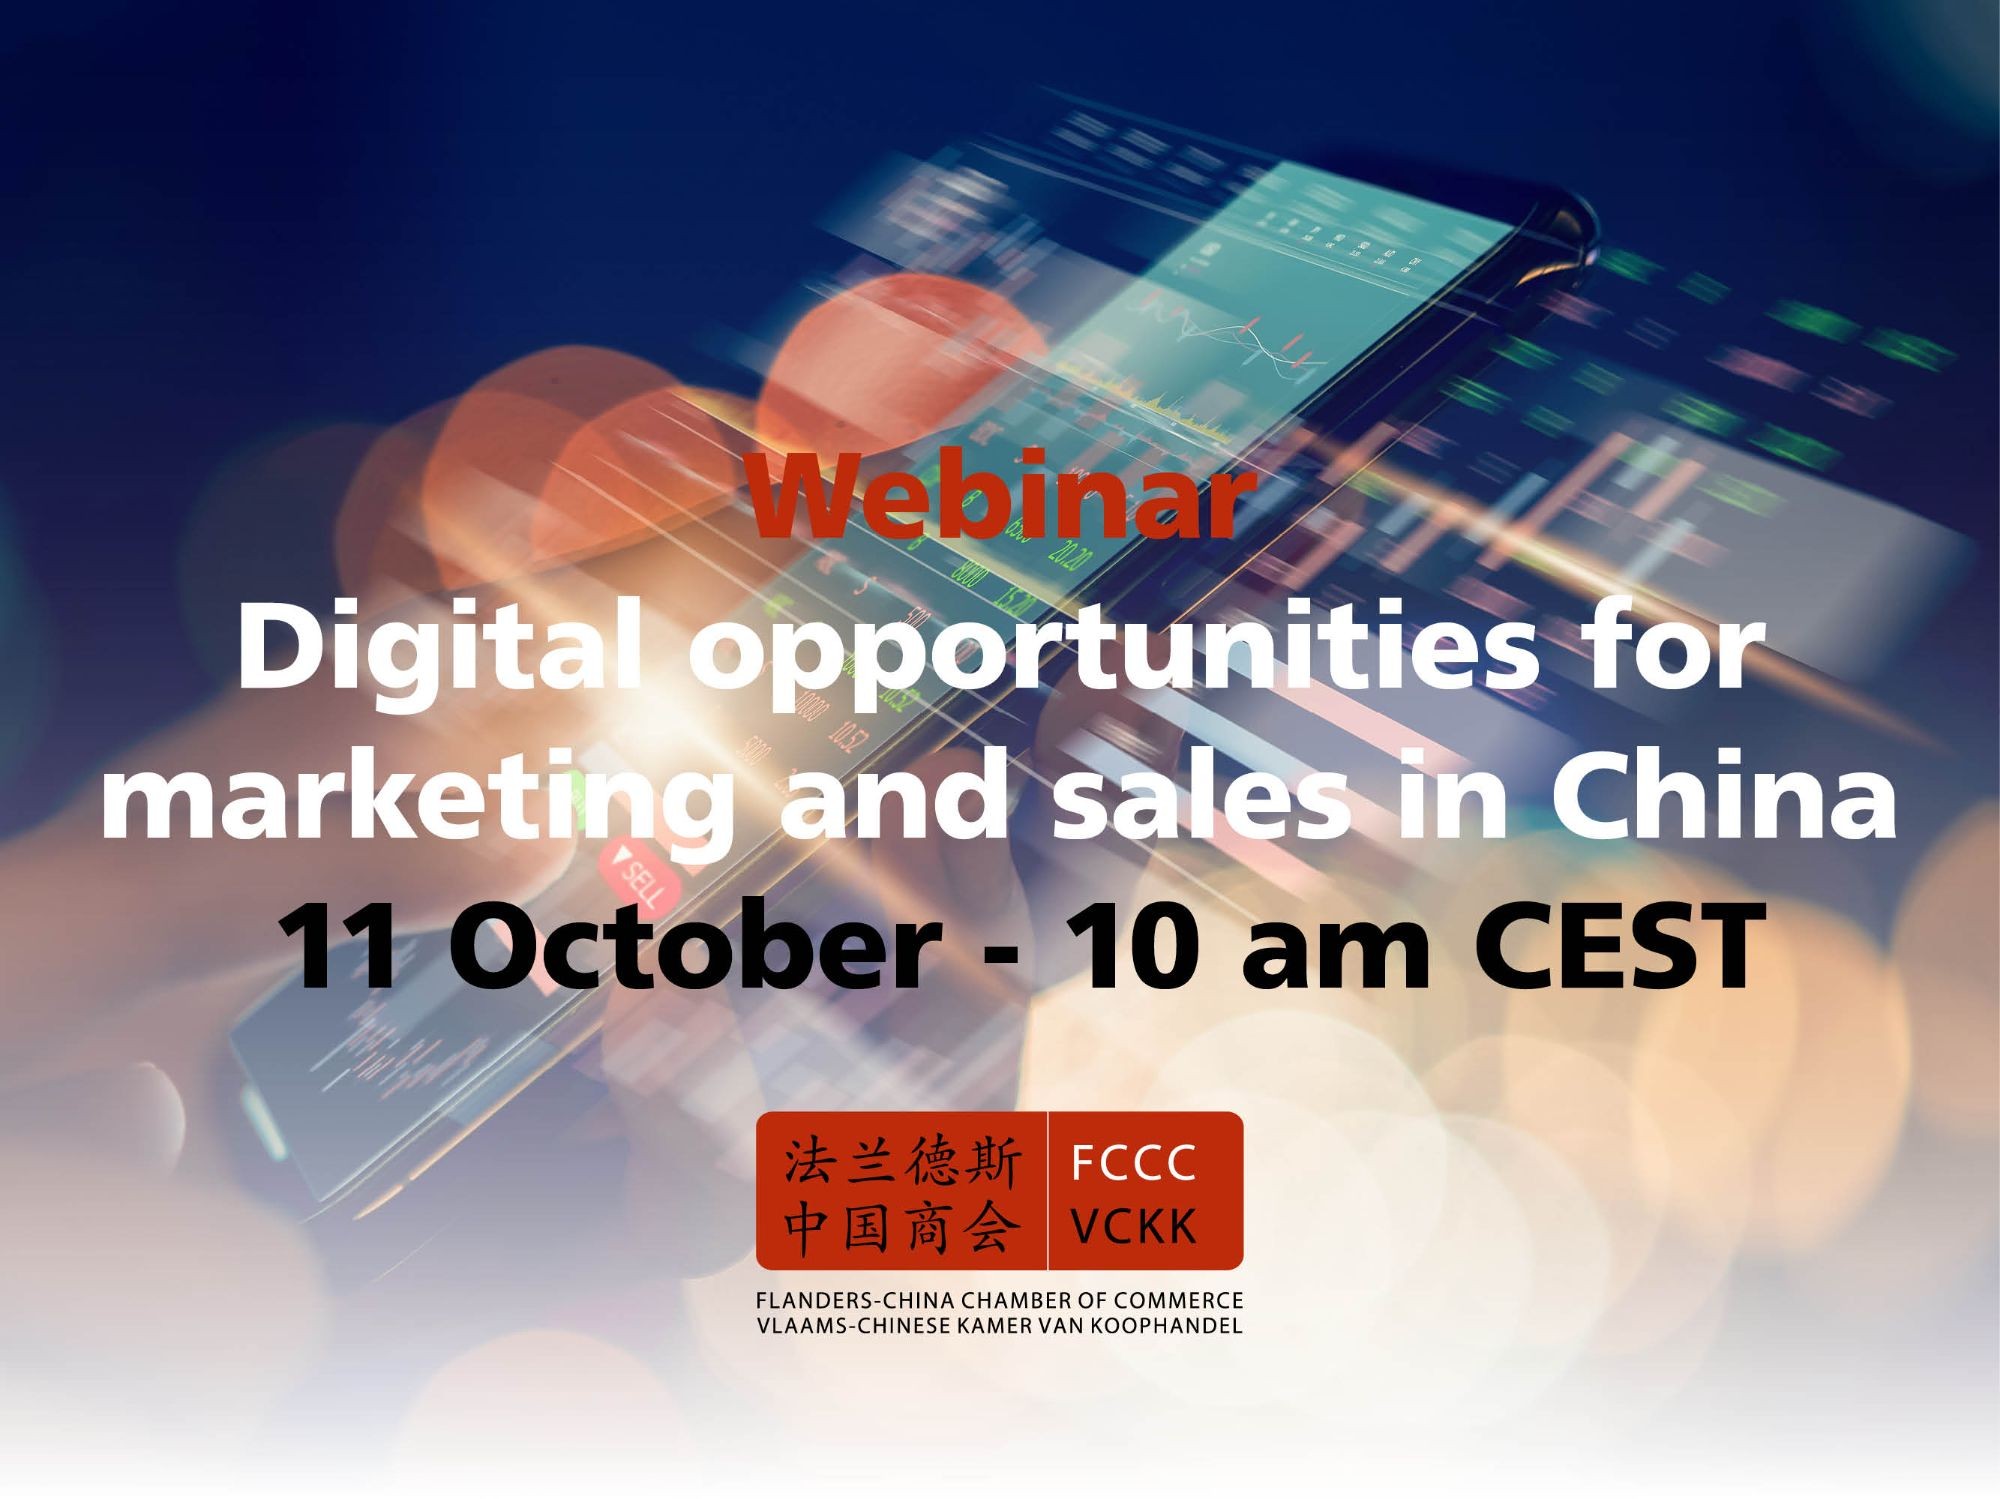 Webinar: Digital opportunities for marketing and sales in China - 11 October - 10 am CEST